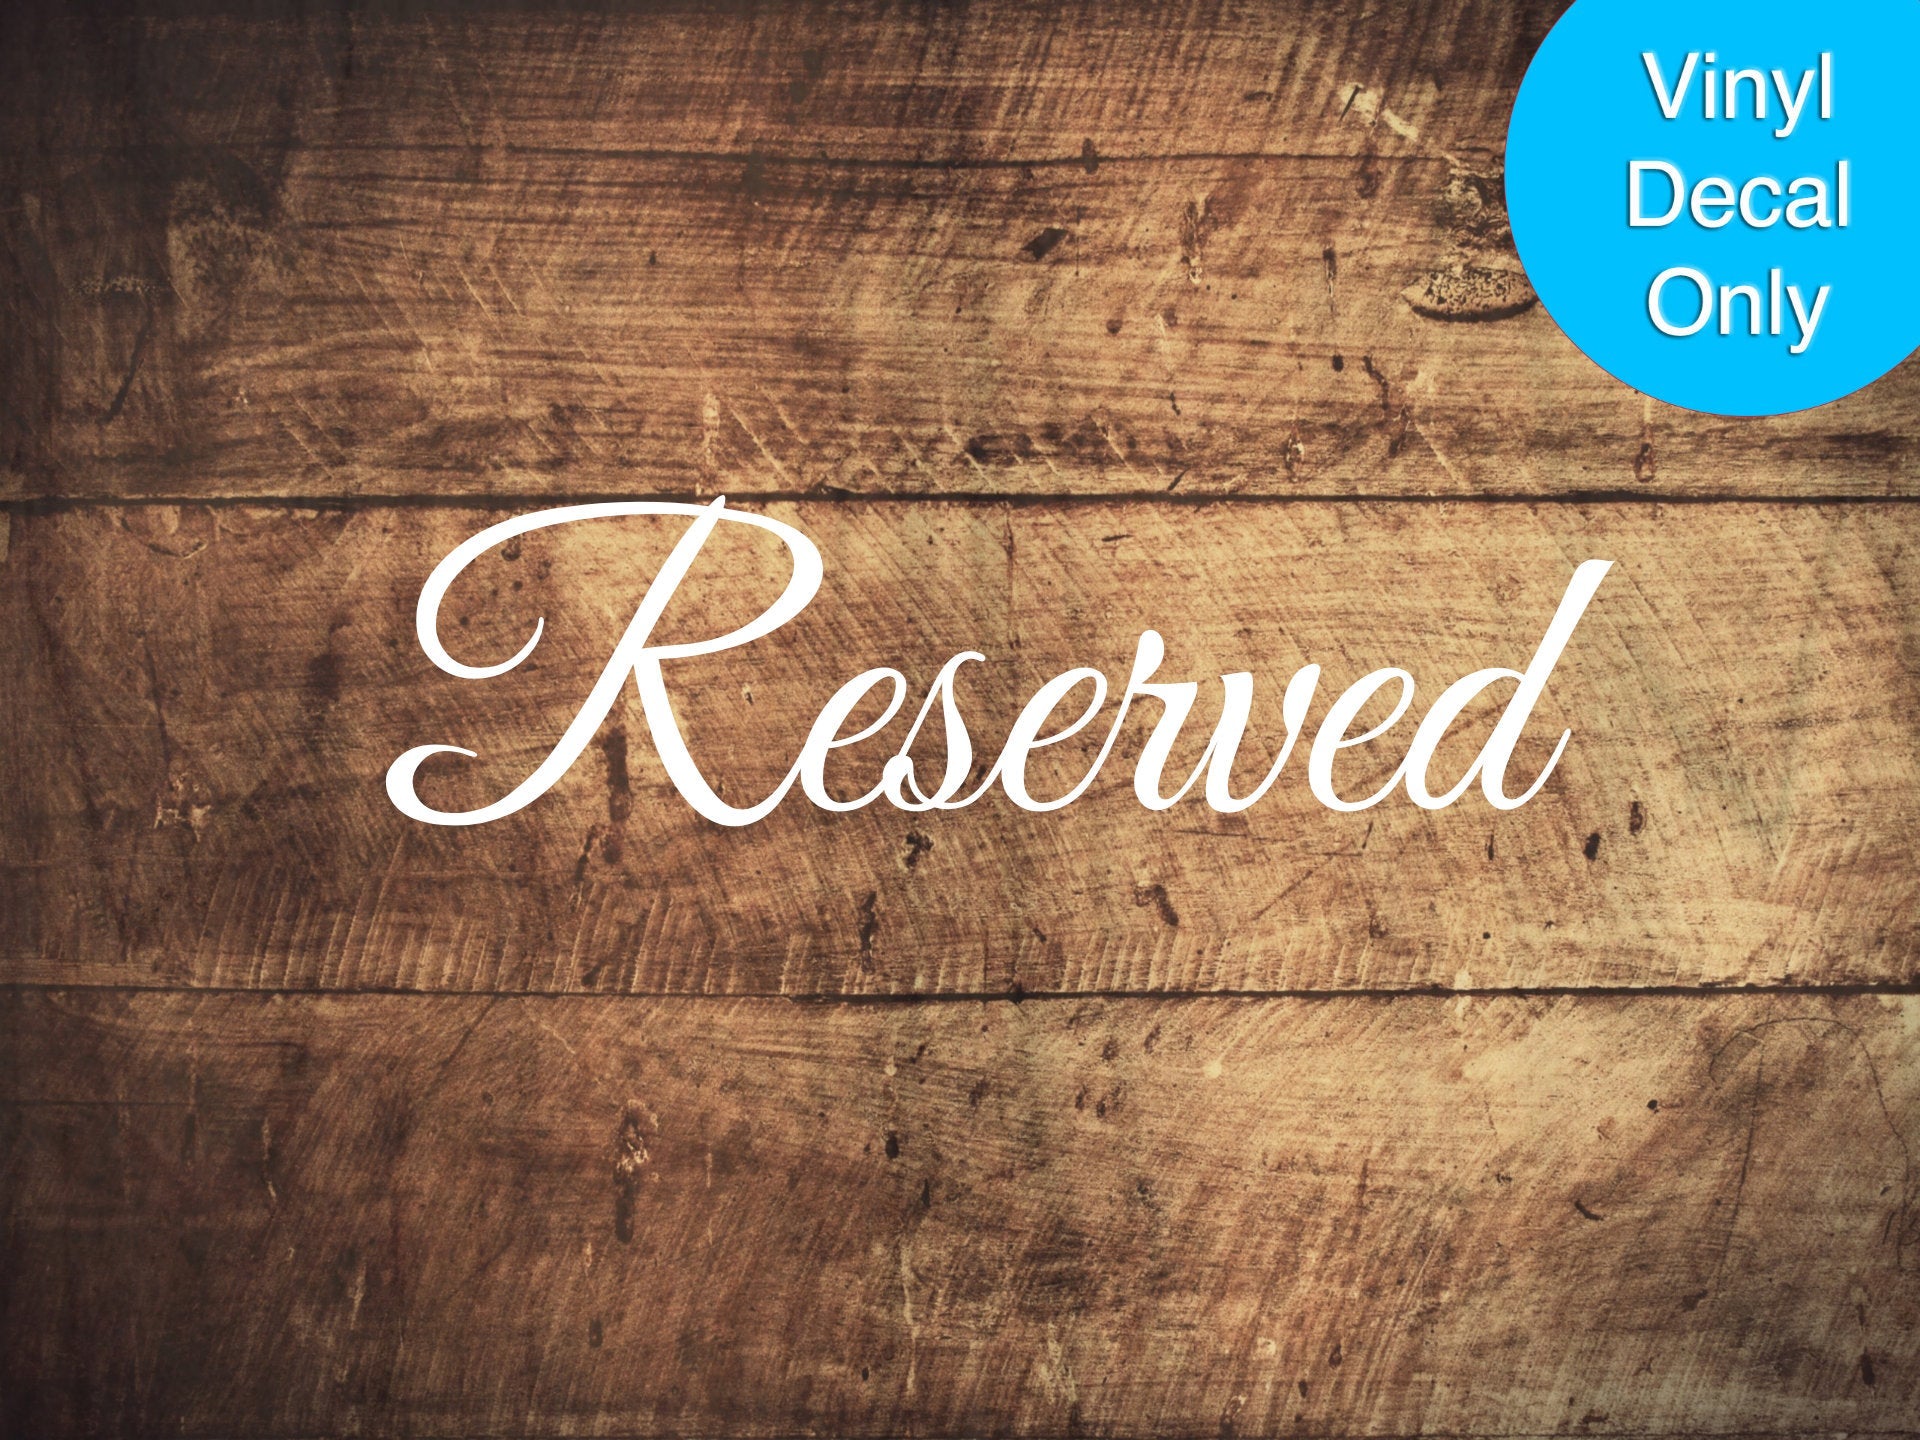 Reserved Sign Wedding Ceremony - Permanent Vinyl Decal for Reception, Corporate Event, Birthdays, Parties, Concerts